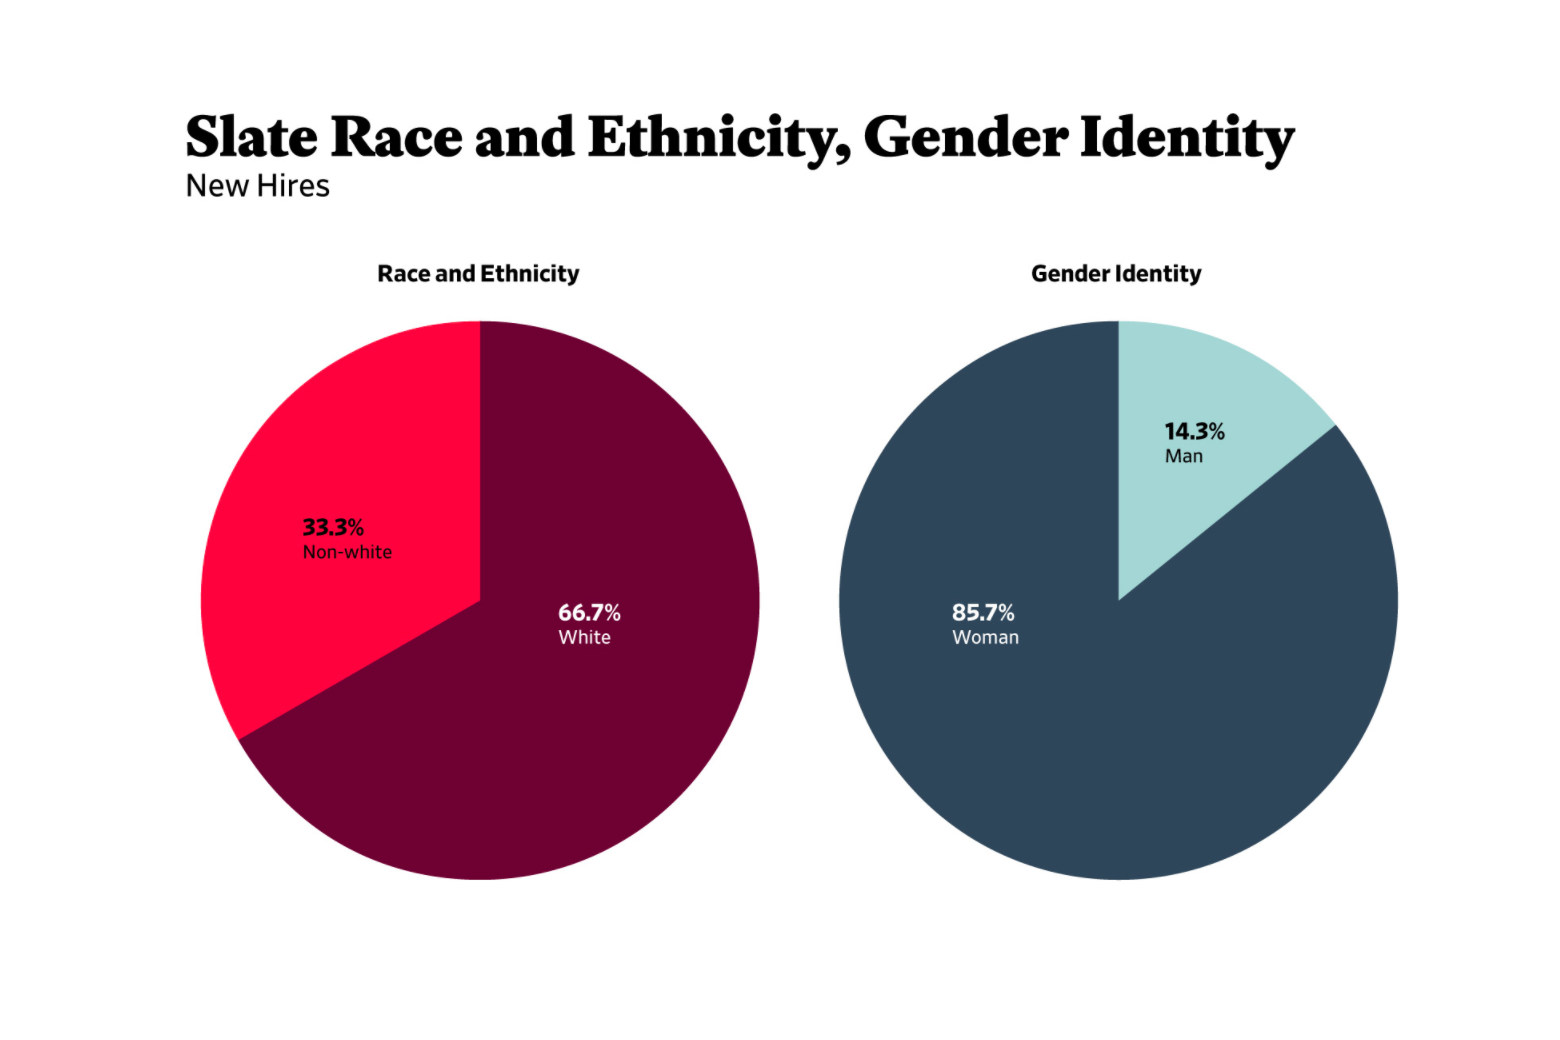 Two pie charts showing race and ethnicity and gender identity of new hires at Slate.